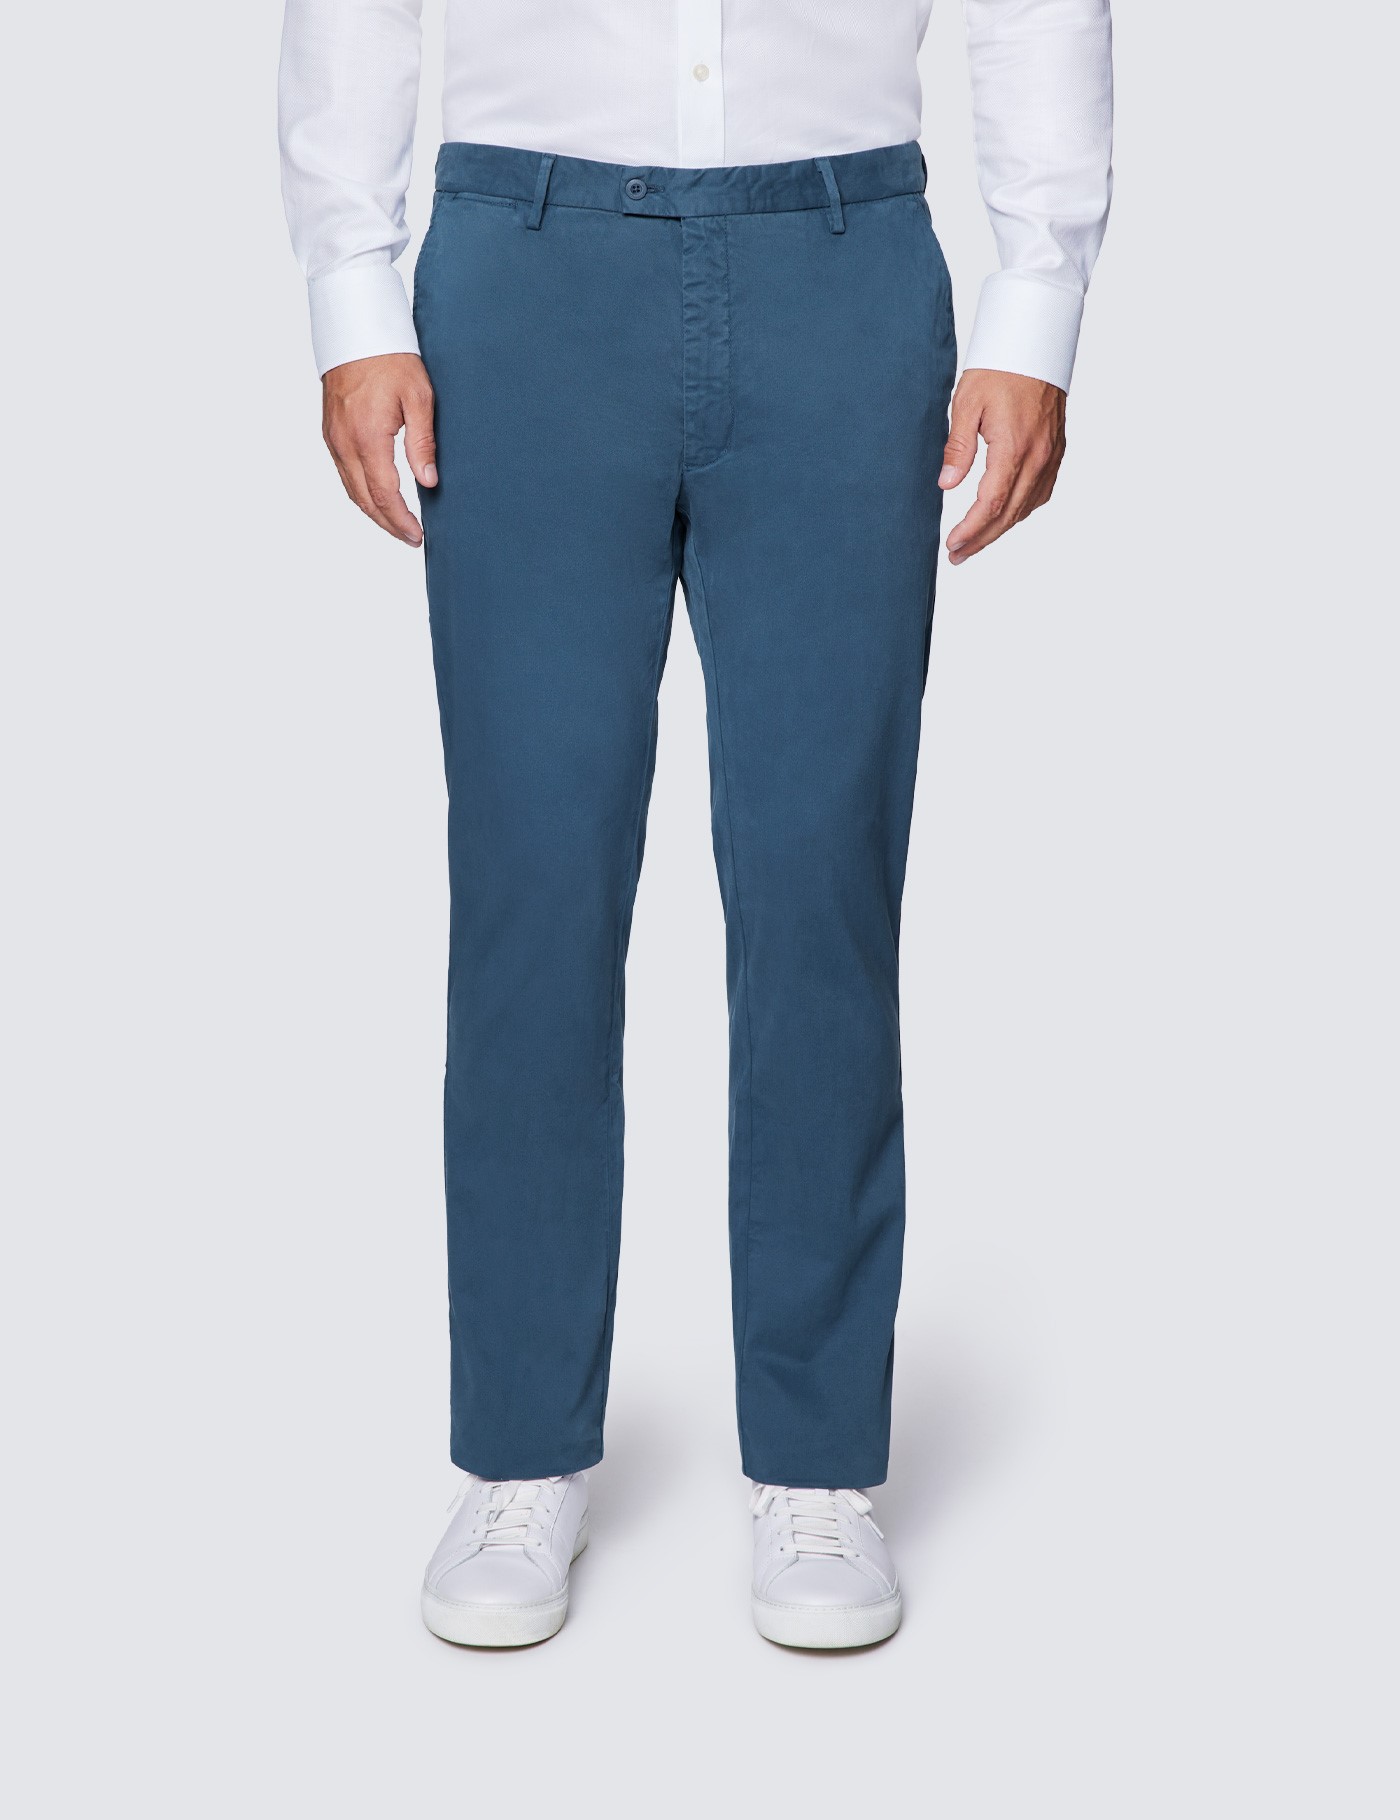 Organic Cotton Men's Chinos in Teal | Hawes & Curtis